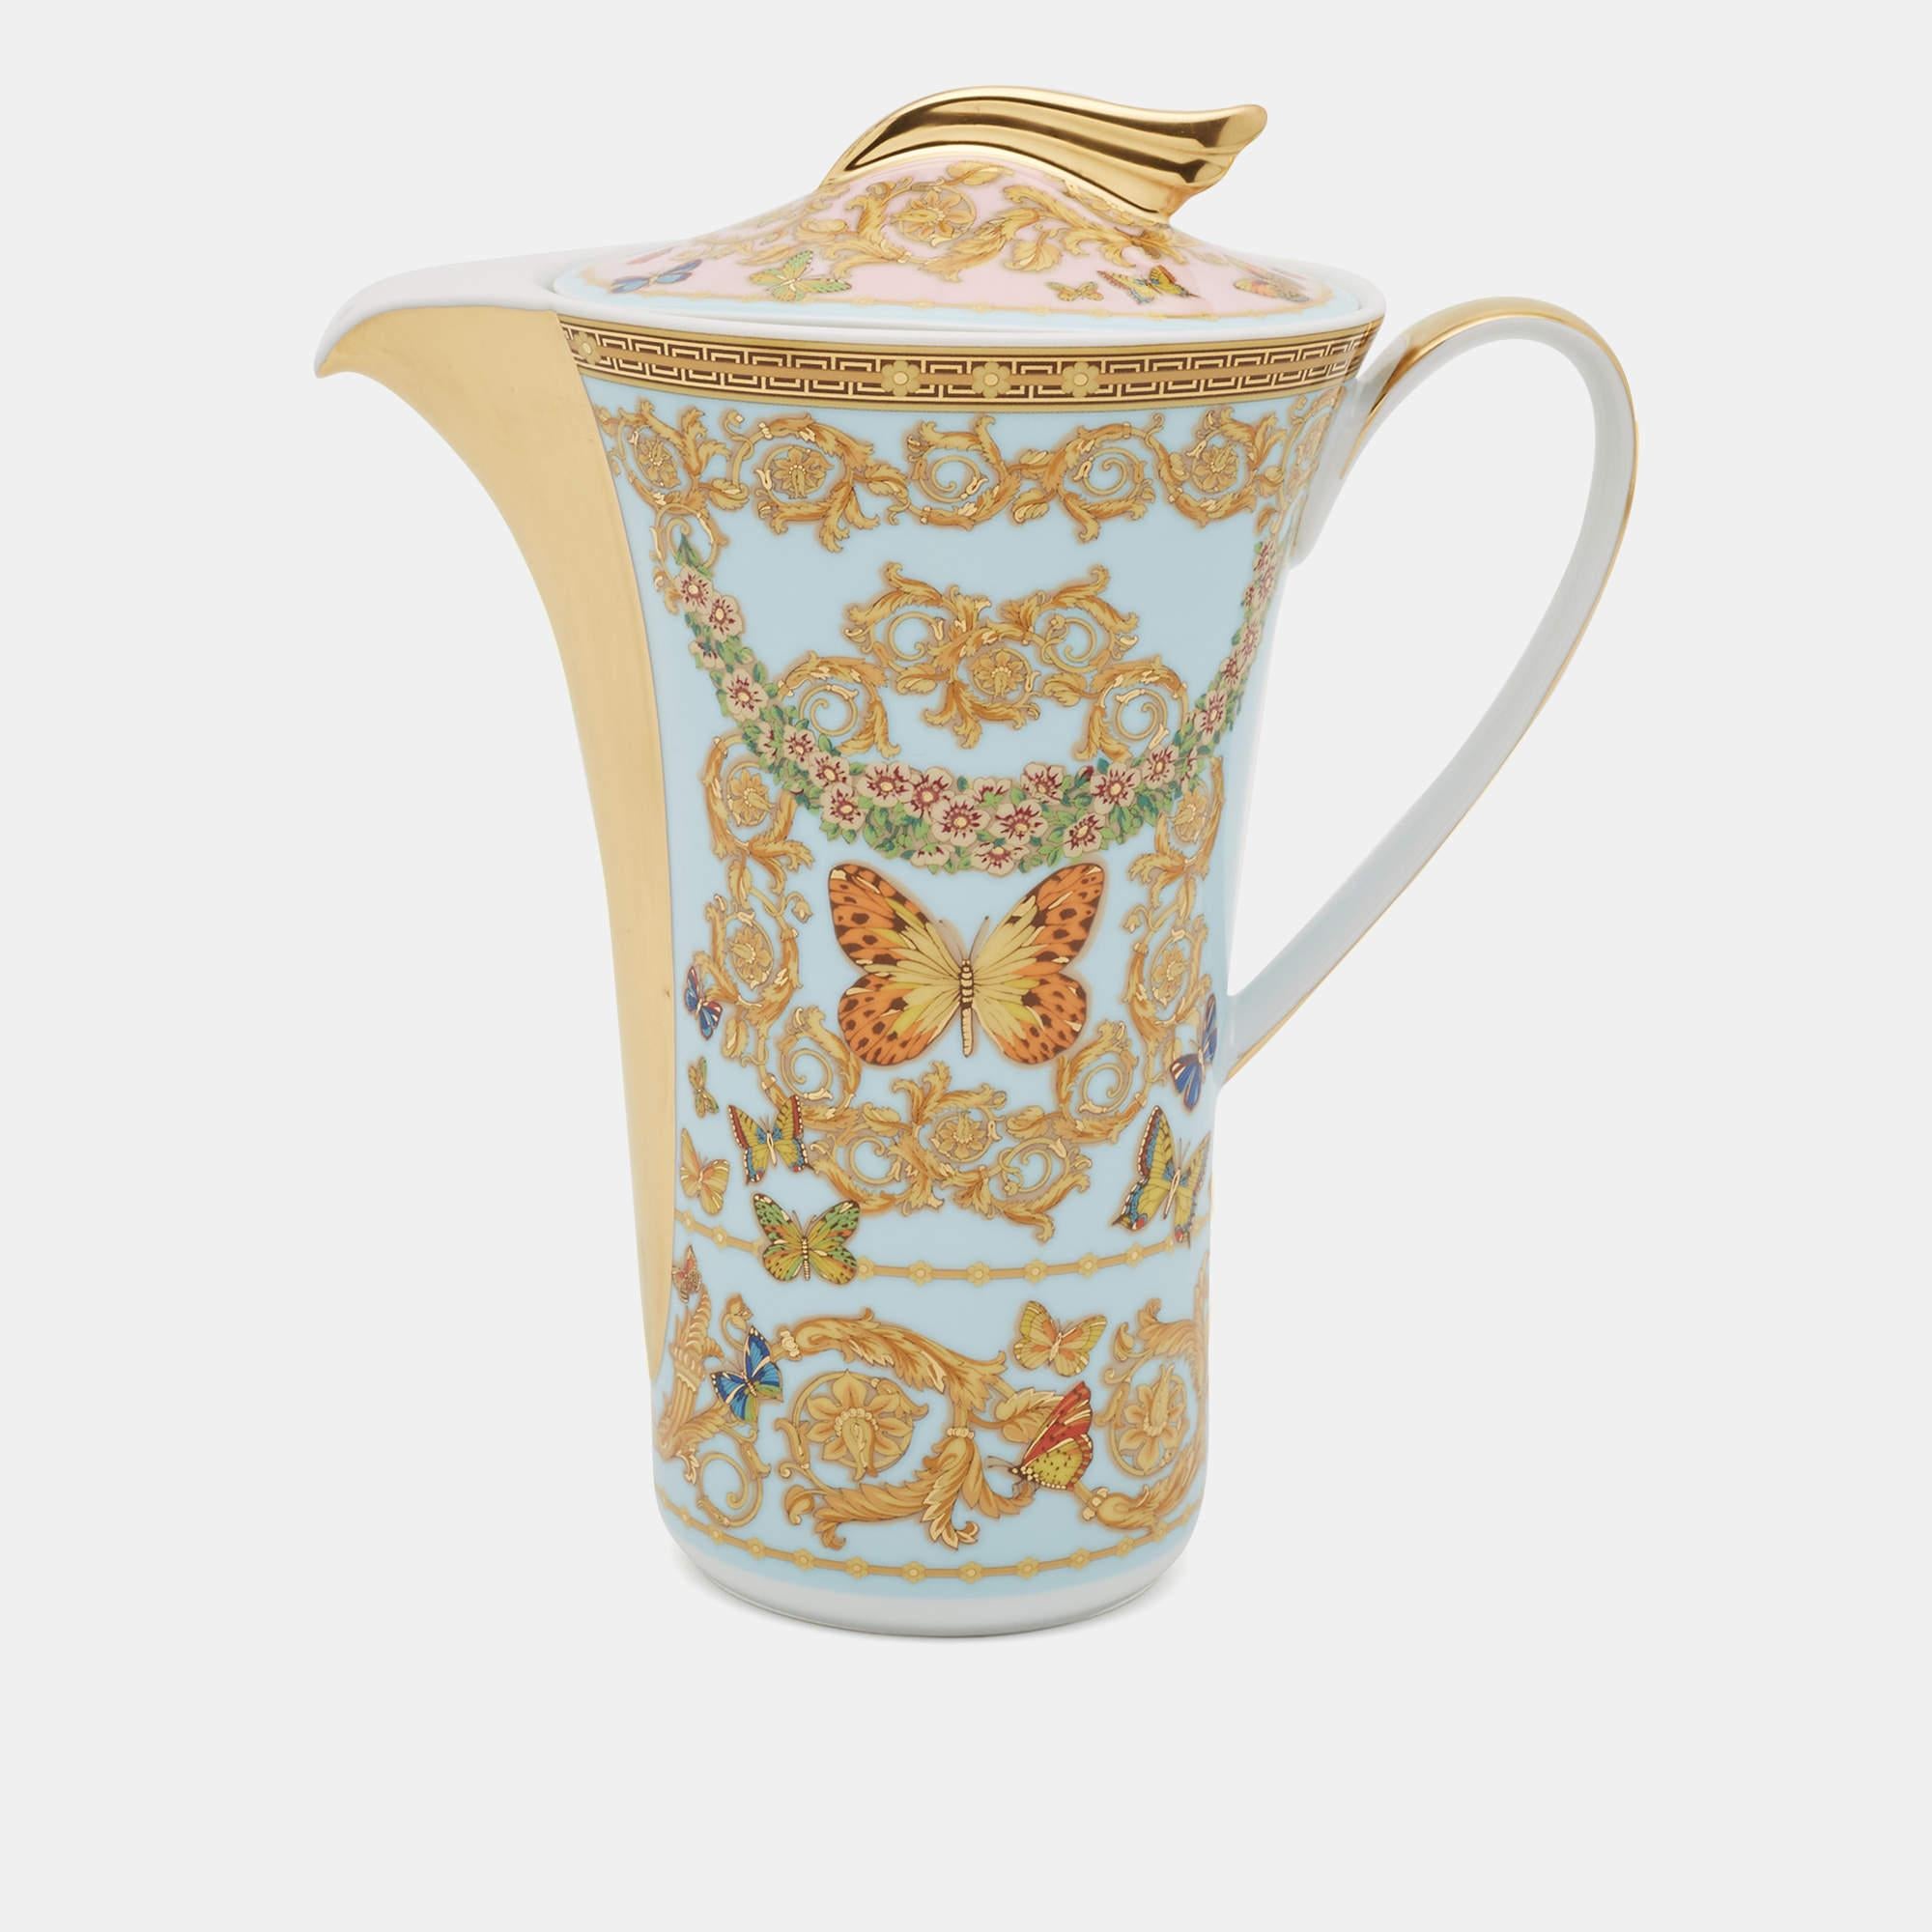 Elevate your table setting with this coffee pot from Versace x Rosenthal. Crafted excellently using high-quality porcelain, it has delicate details in rich hues that have been carefully applied to project the most luxurious appeal.

Includes: Info